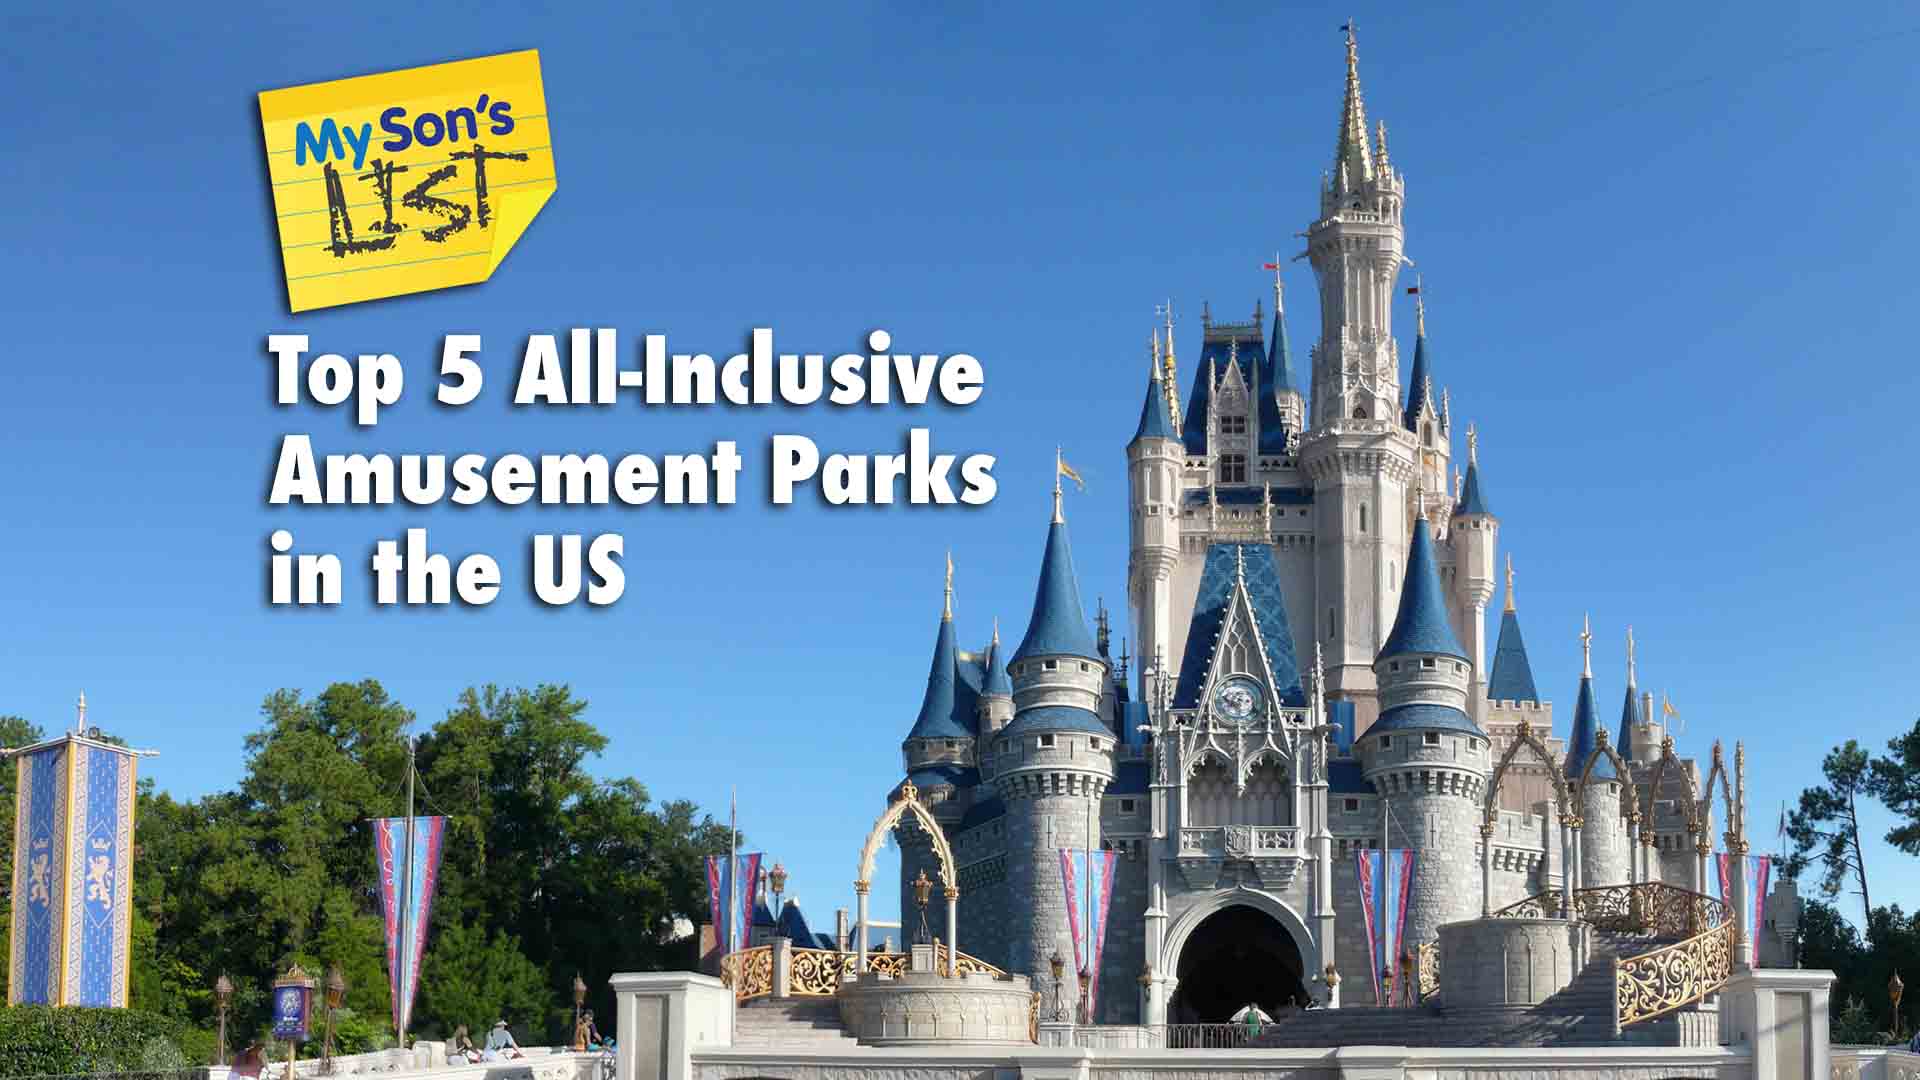 Top 5 All-Inclusive Amusement Parks in the US